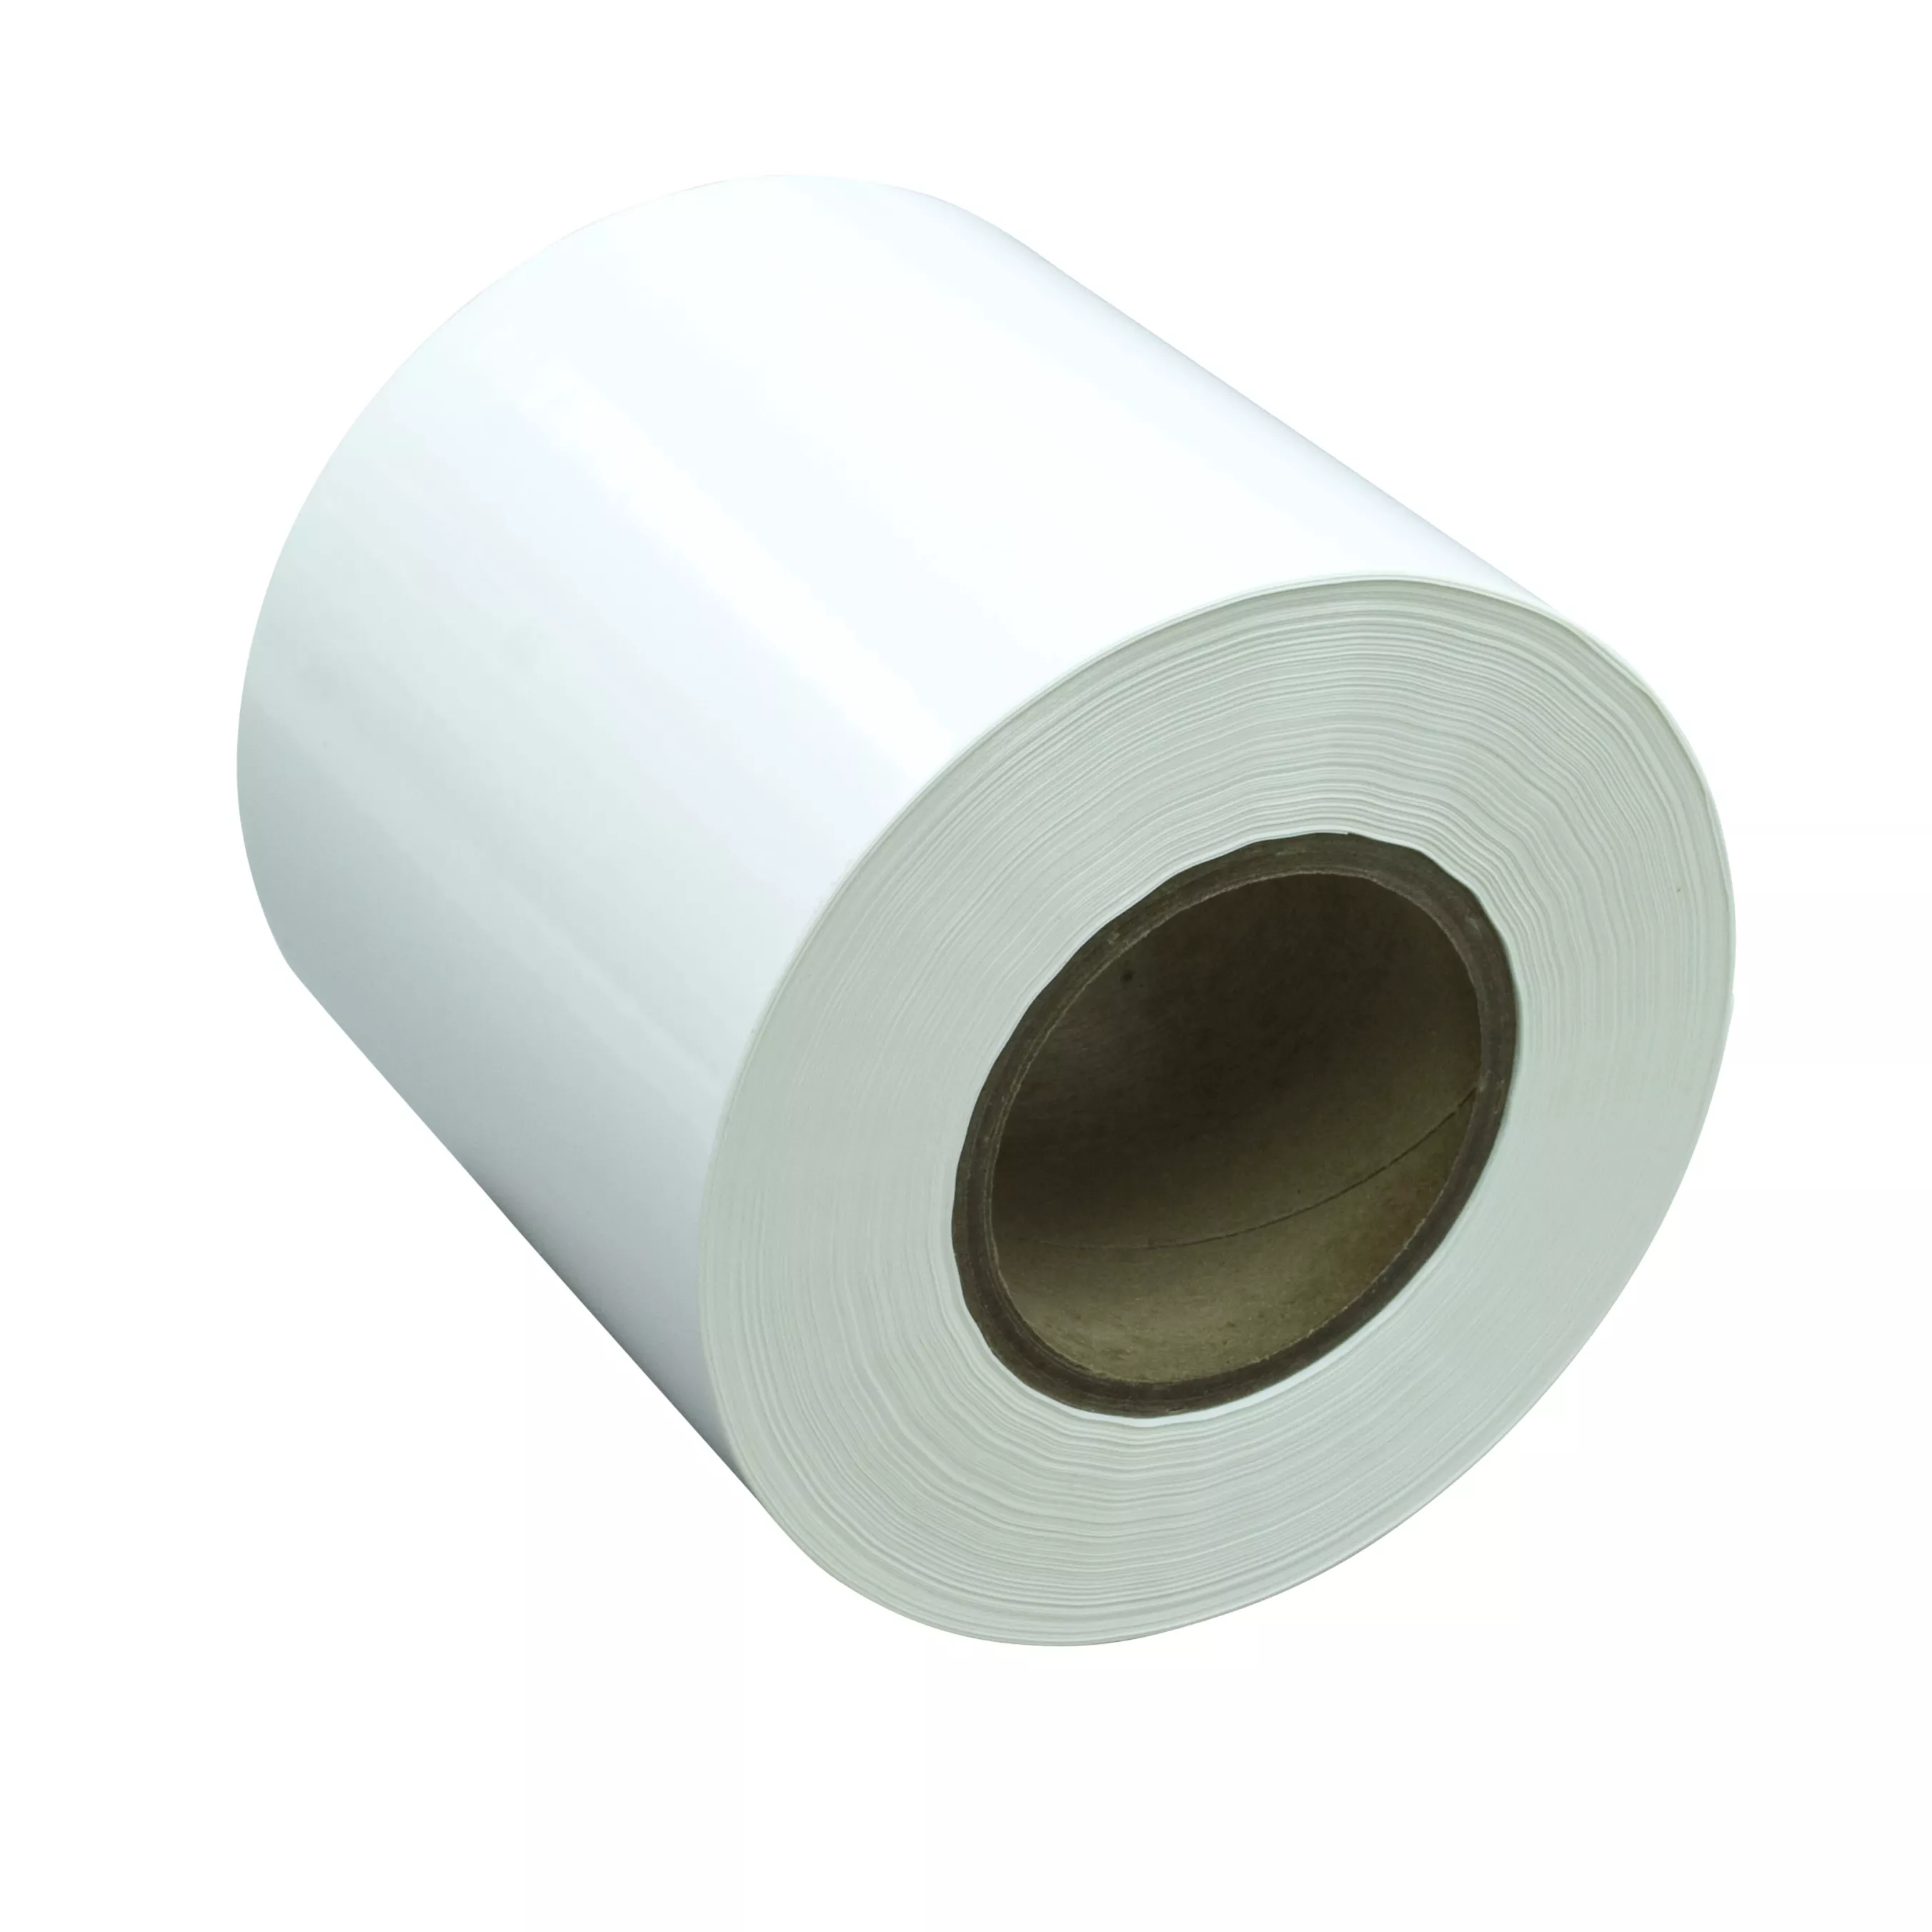 3M™ Removable Label Material FP016902, White Polypropylene, 6 in x 1668
ft, 1 Roll/Case